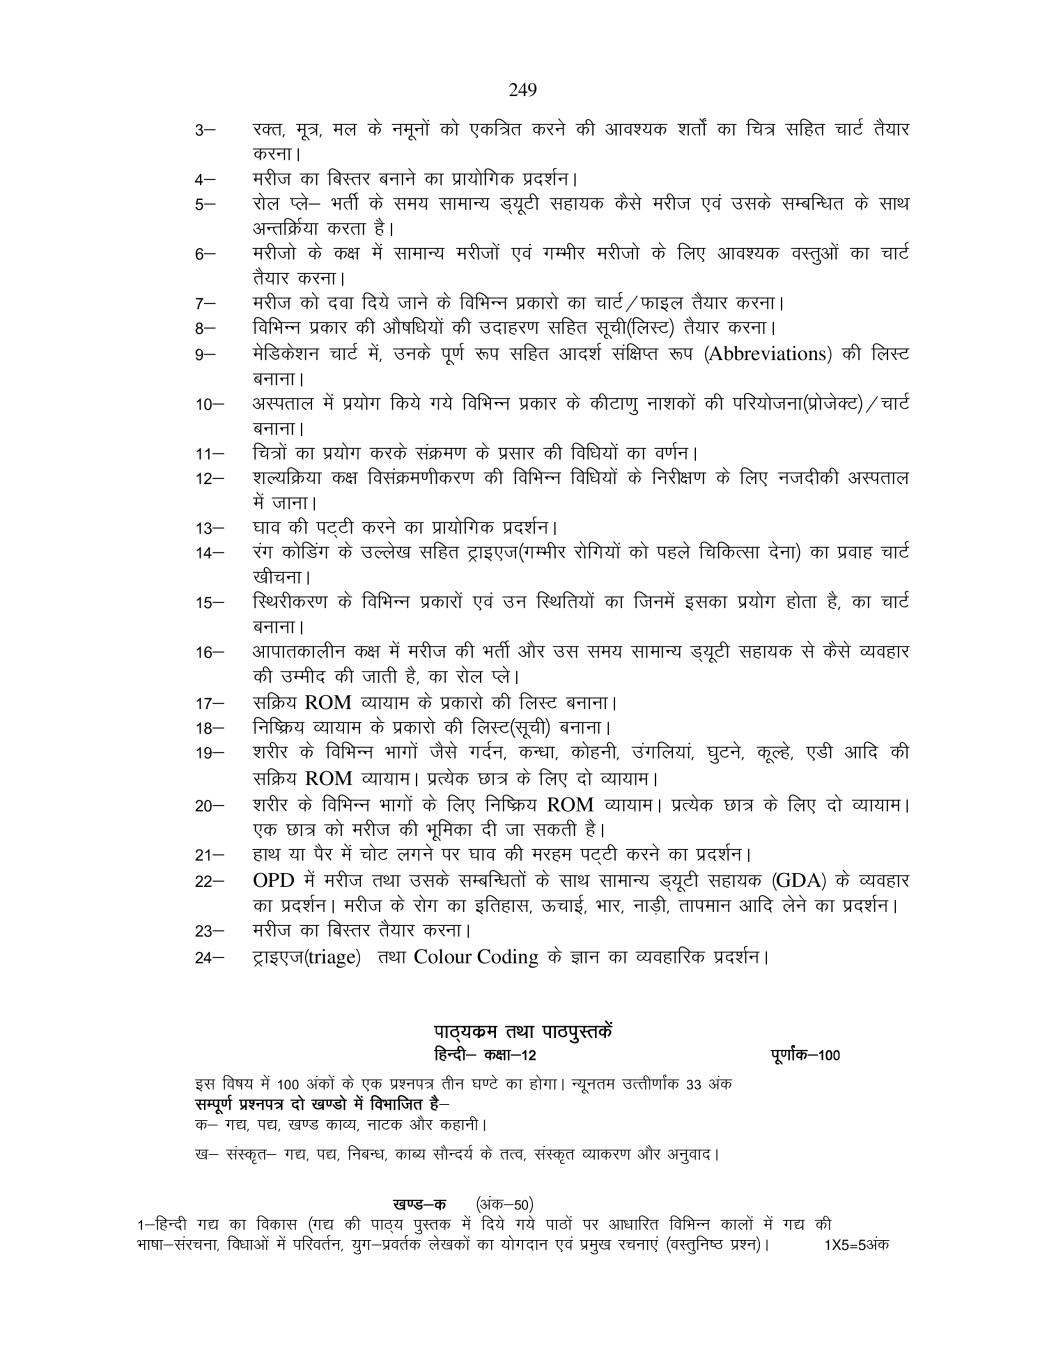 UP Board Syllabus Class 12th - Page 1